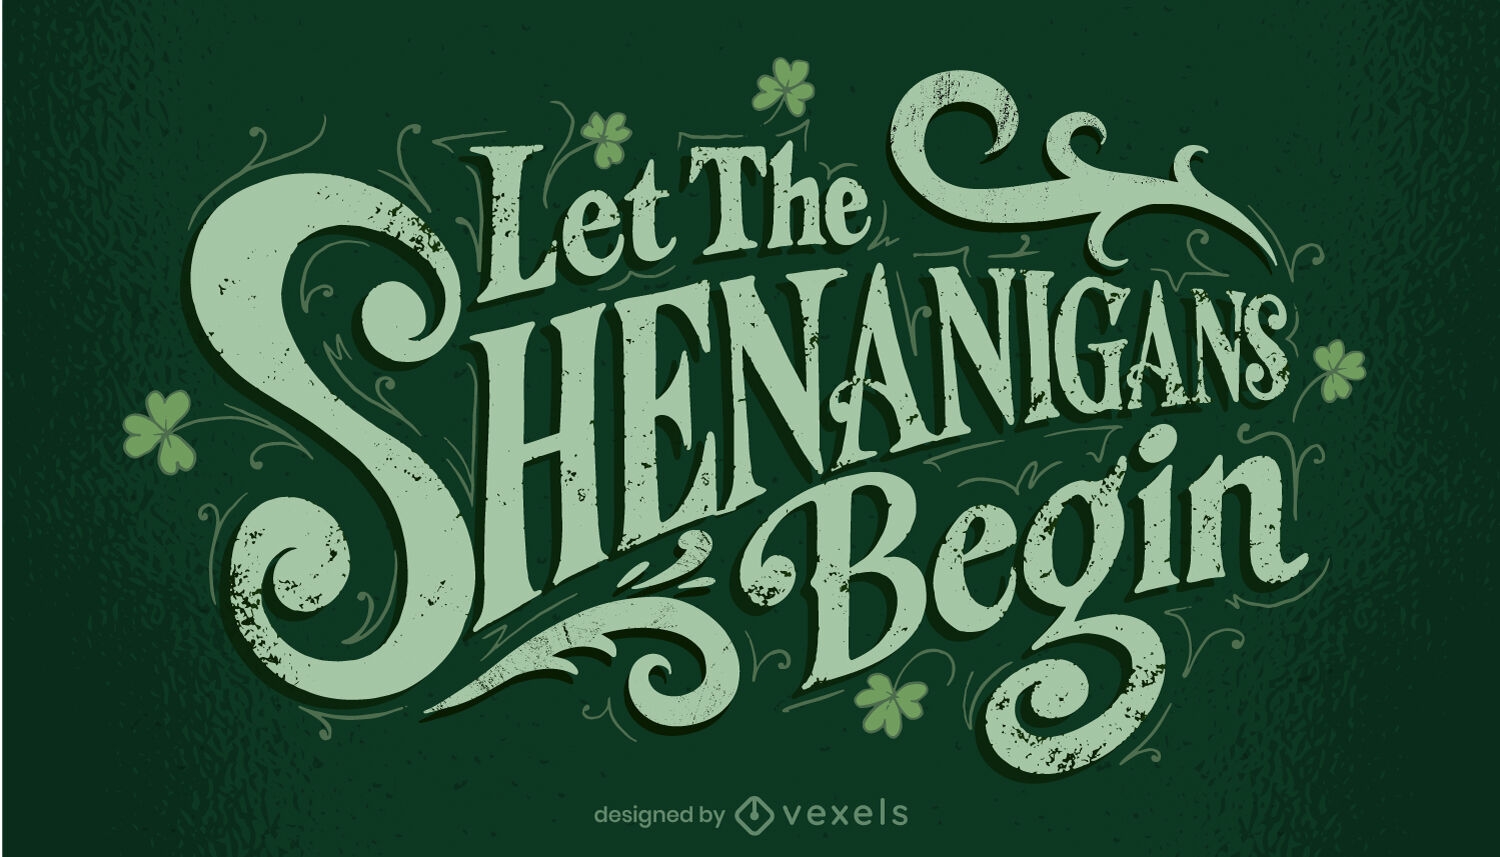 Let the shenanigans begin St. Patrick's Day quote